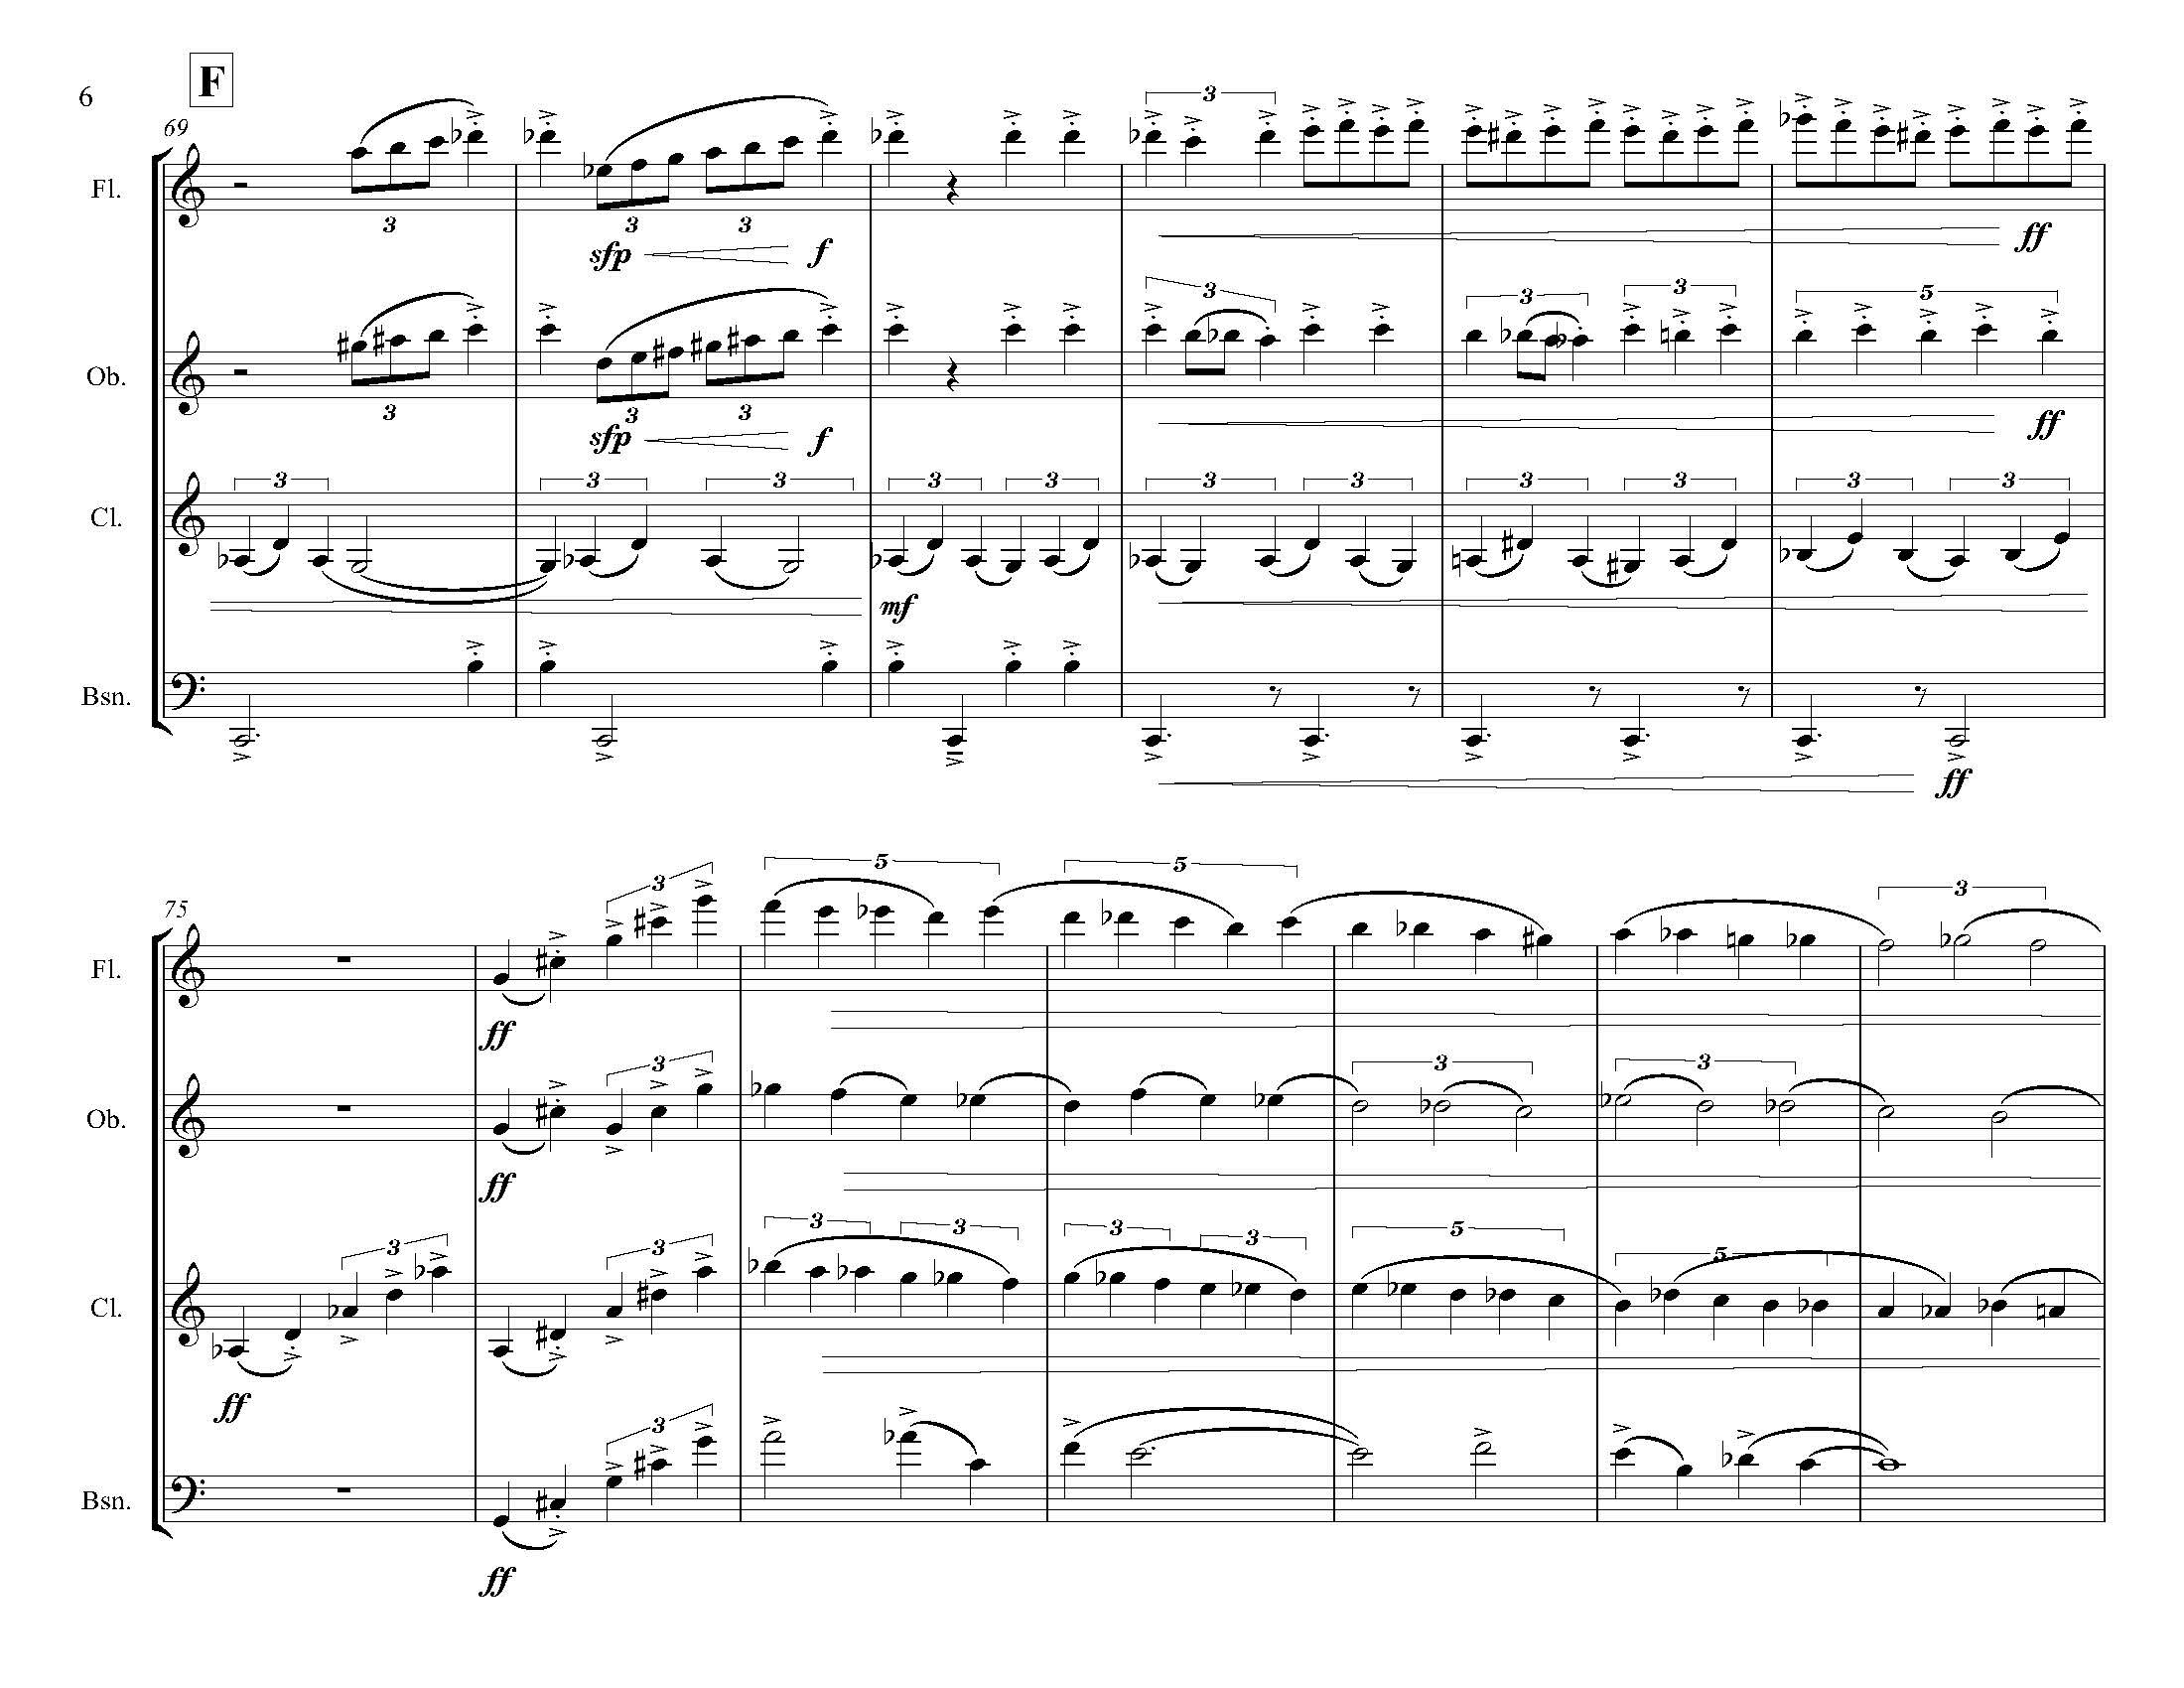 March the Twenty-Fifth - Complete Score_Page_12.jpg